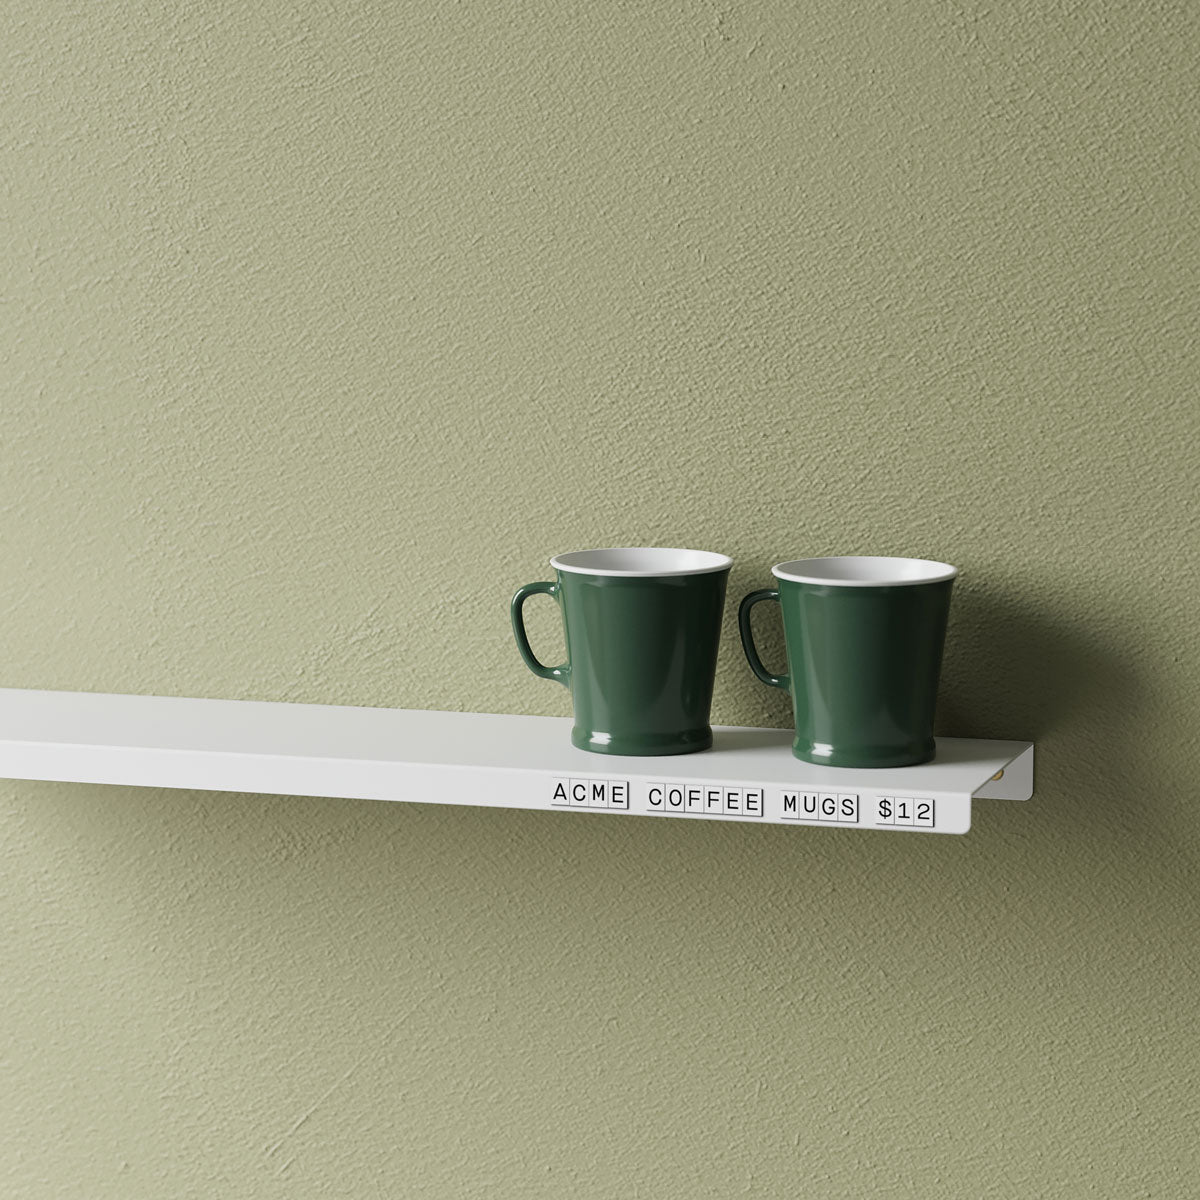 Floating shelves with price magnets for a store or business